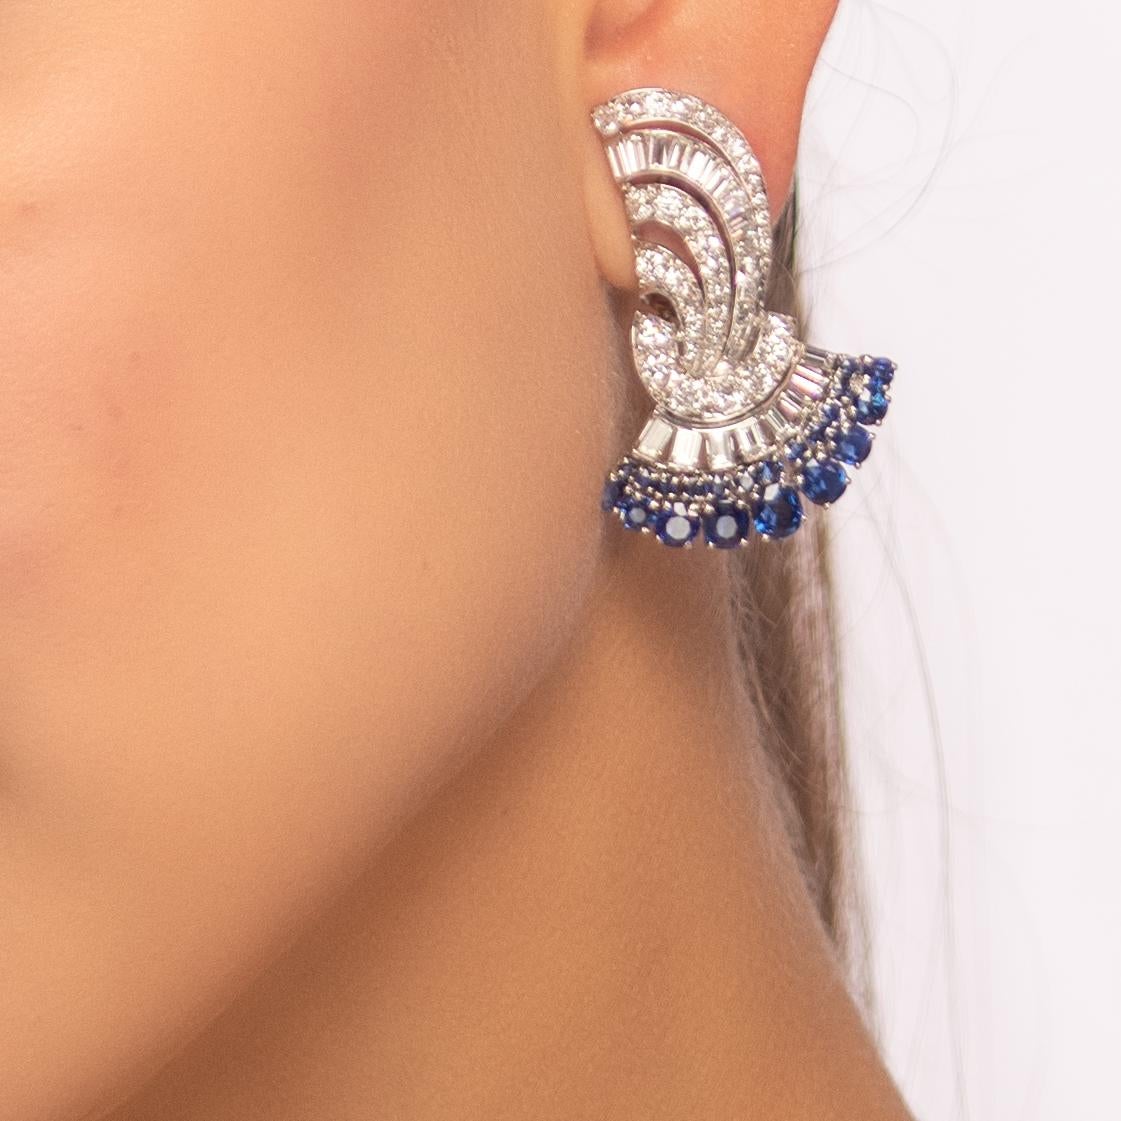 A beautiful and dramatic pair of Art Deco sapphire, diamond and platinum clip earrings. 

The earrings of elegant fan shape comprised of two curved rows of blue sapphires and a row of diamonds. Ribbons of diamonds trail and curve upwards. All